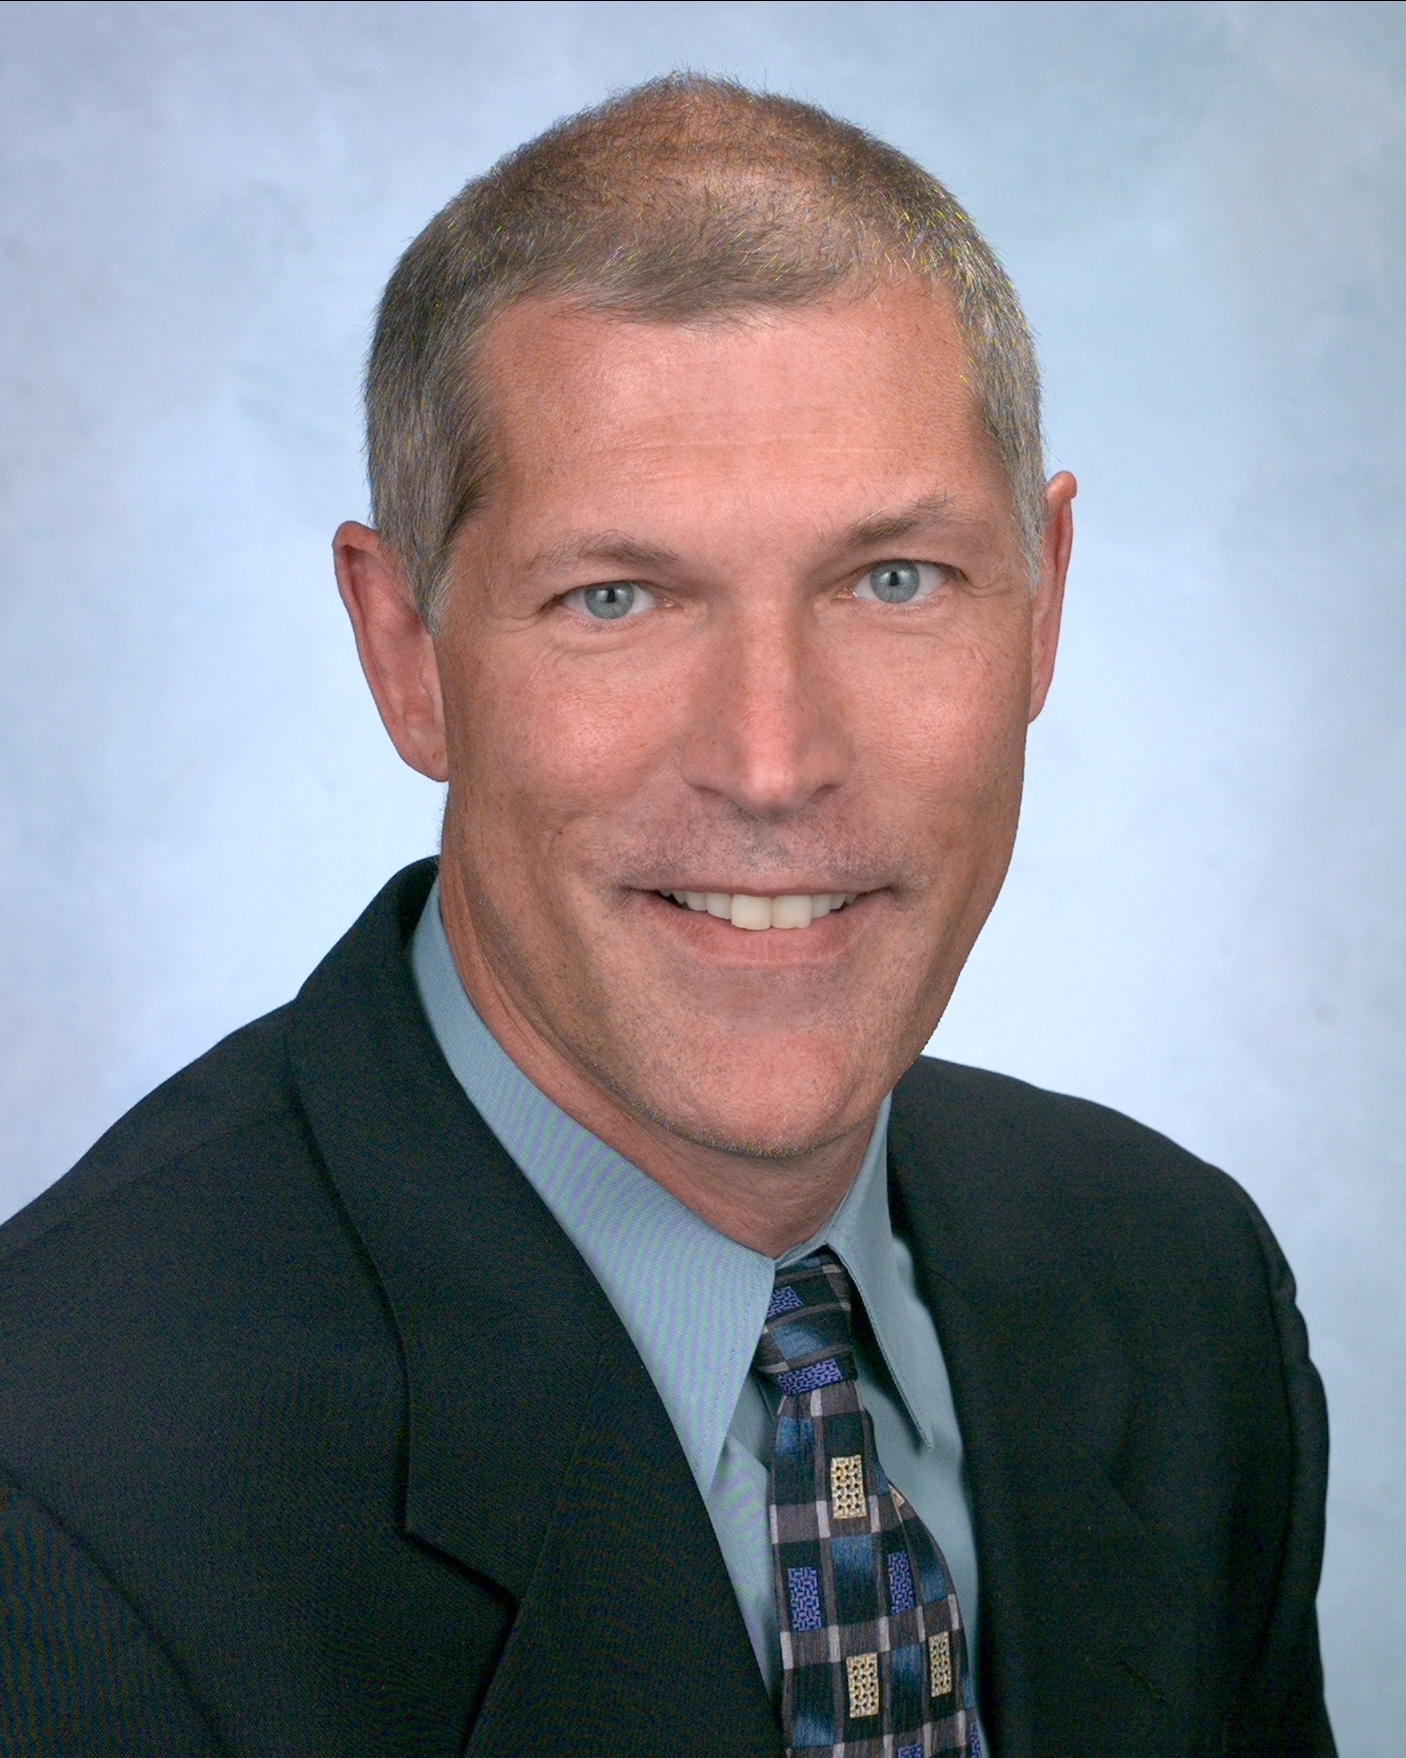 Mike Lancashire is vice president of claims and integrated customer solutions at Main Street America